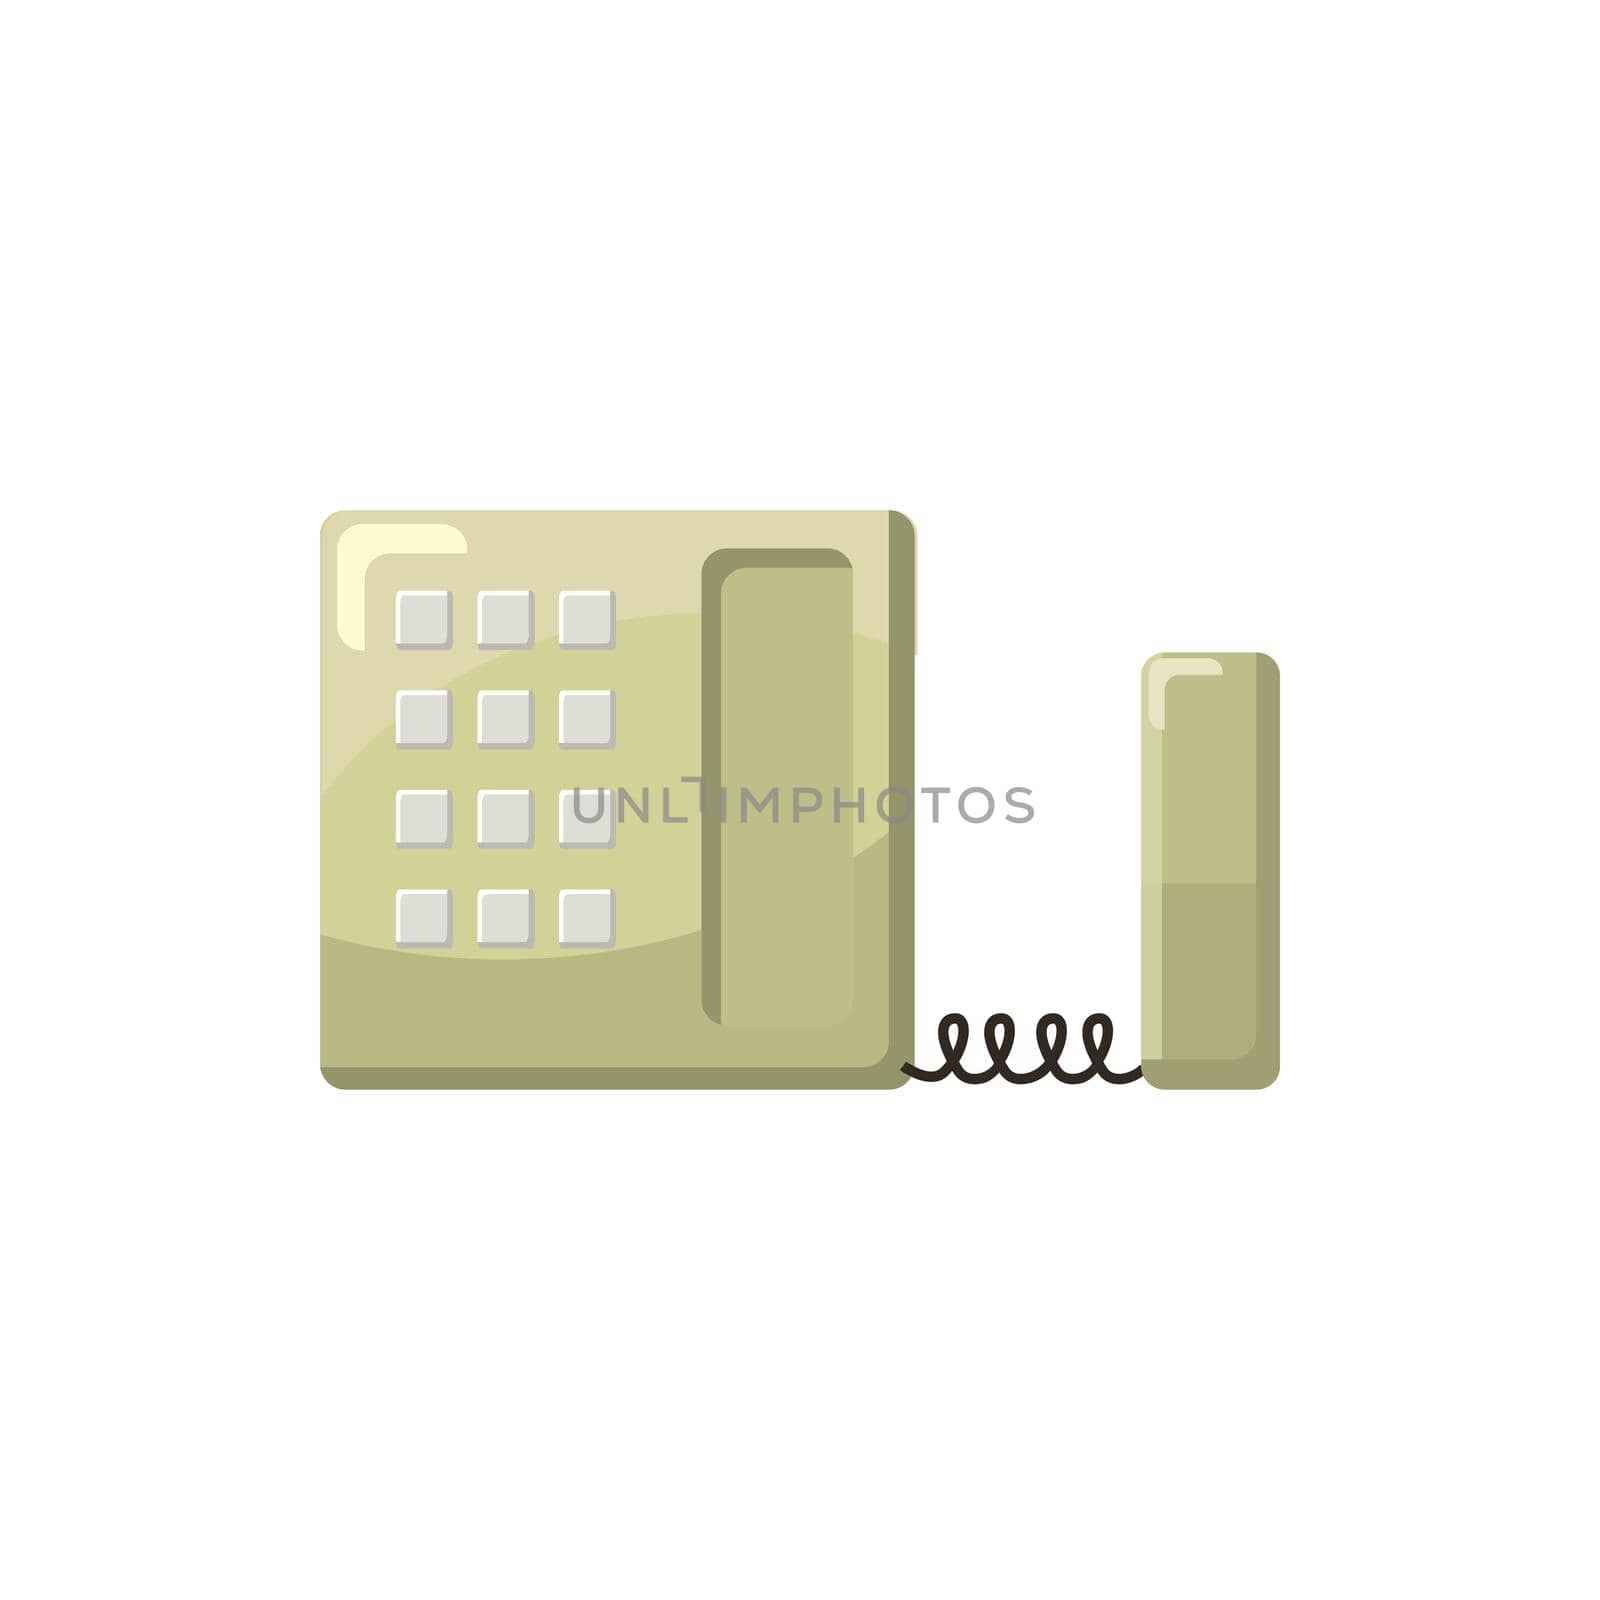 Office phone icon, cartoon style by ylivdesign